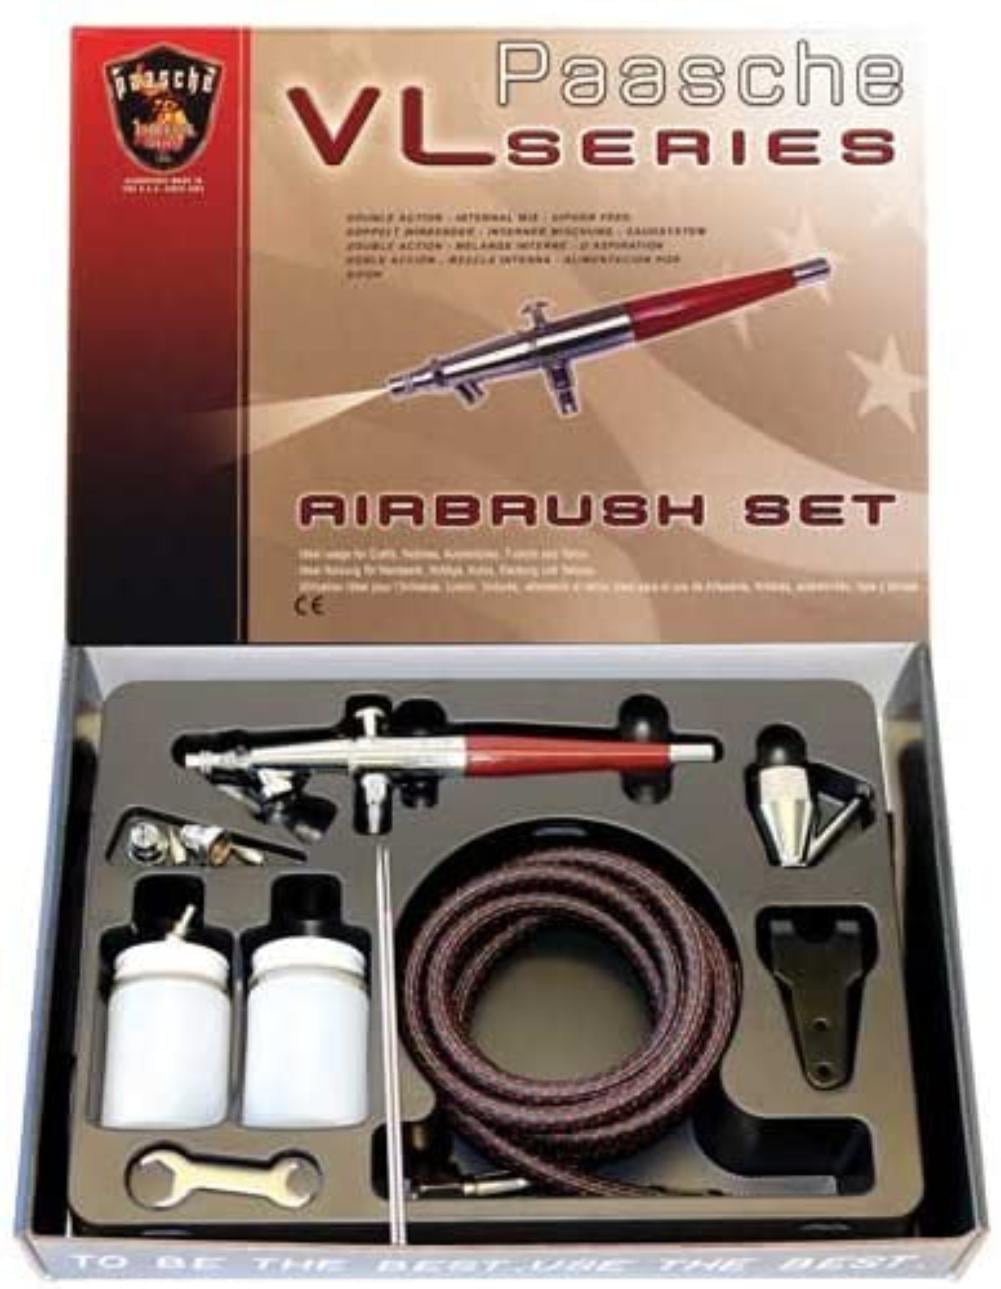 Paasche MIL-SET Double Action Siphon Feed Airbrush Set 